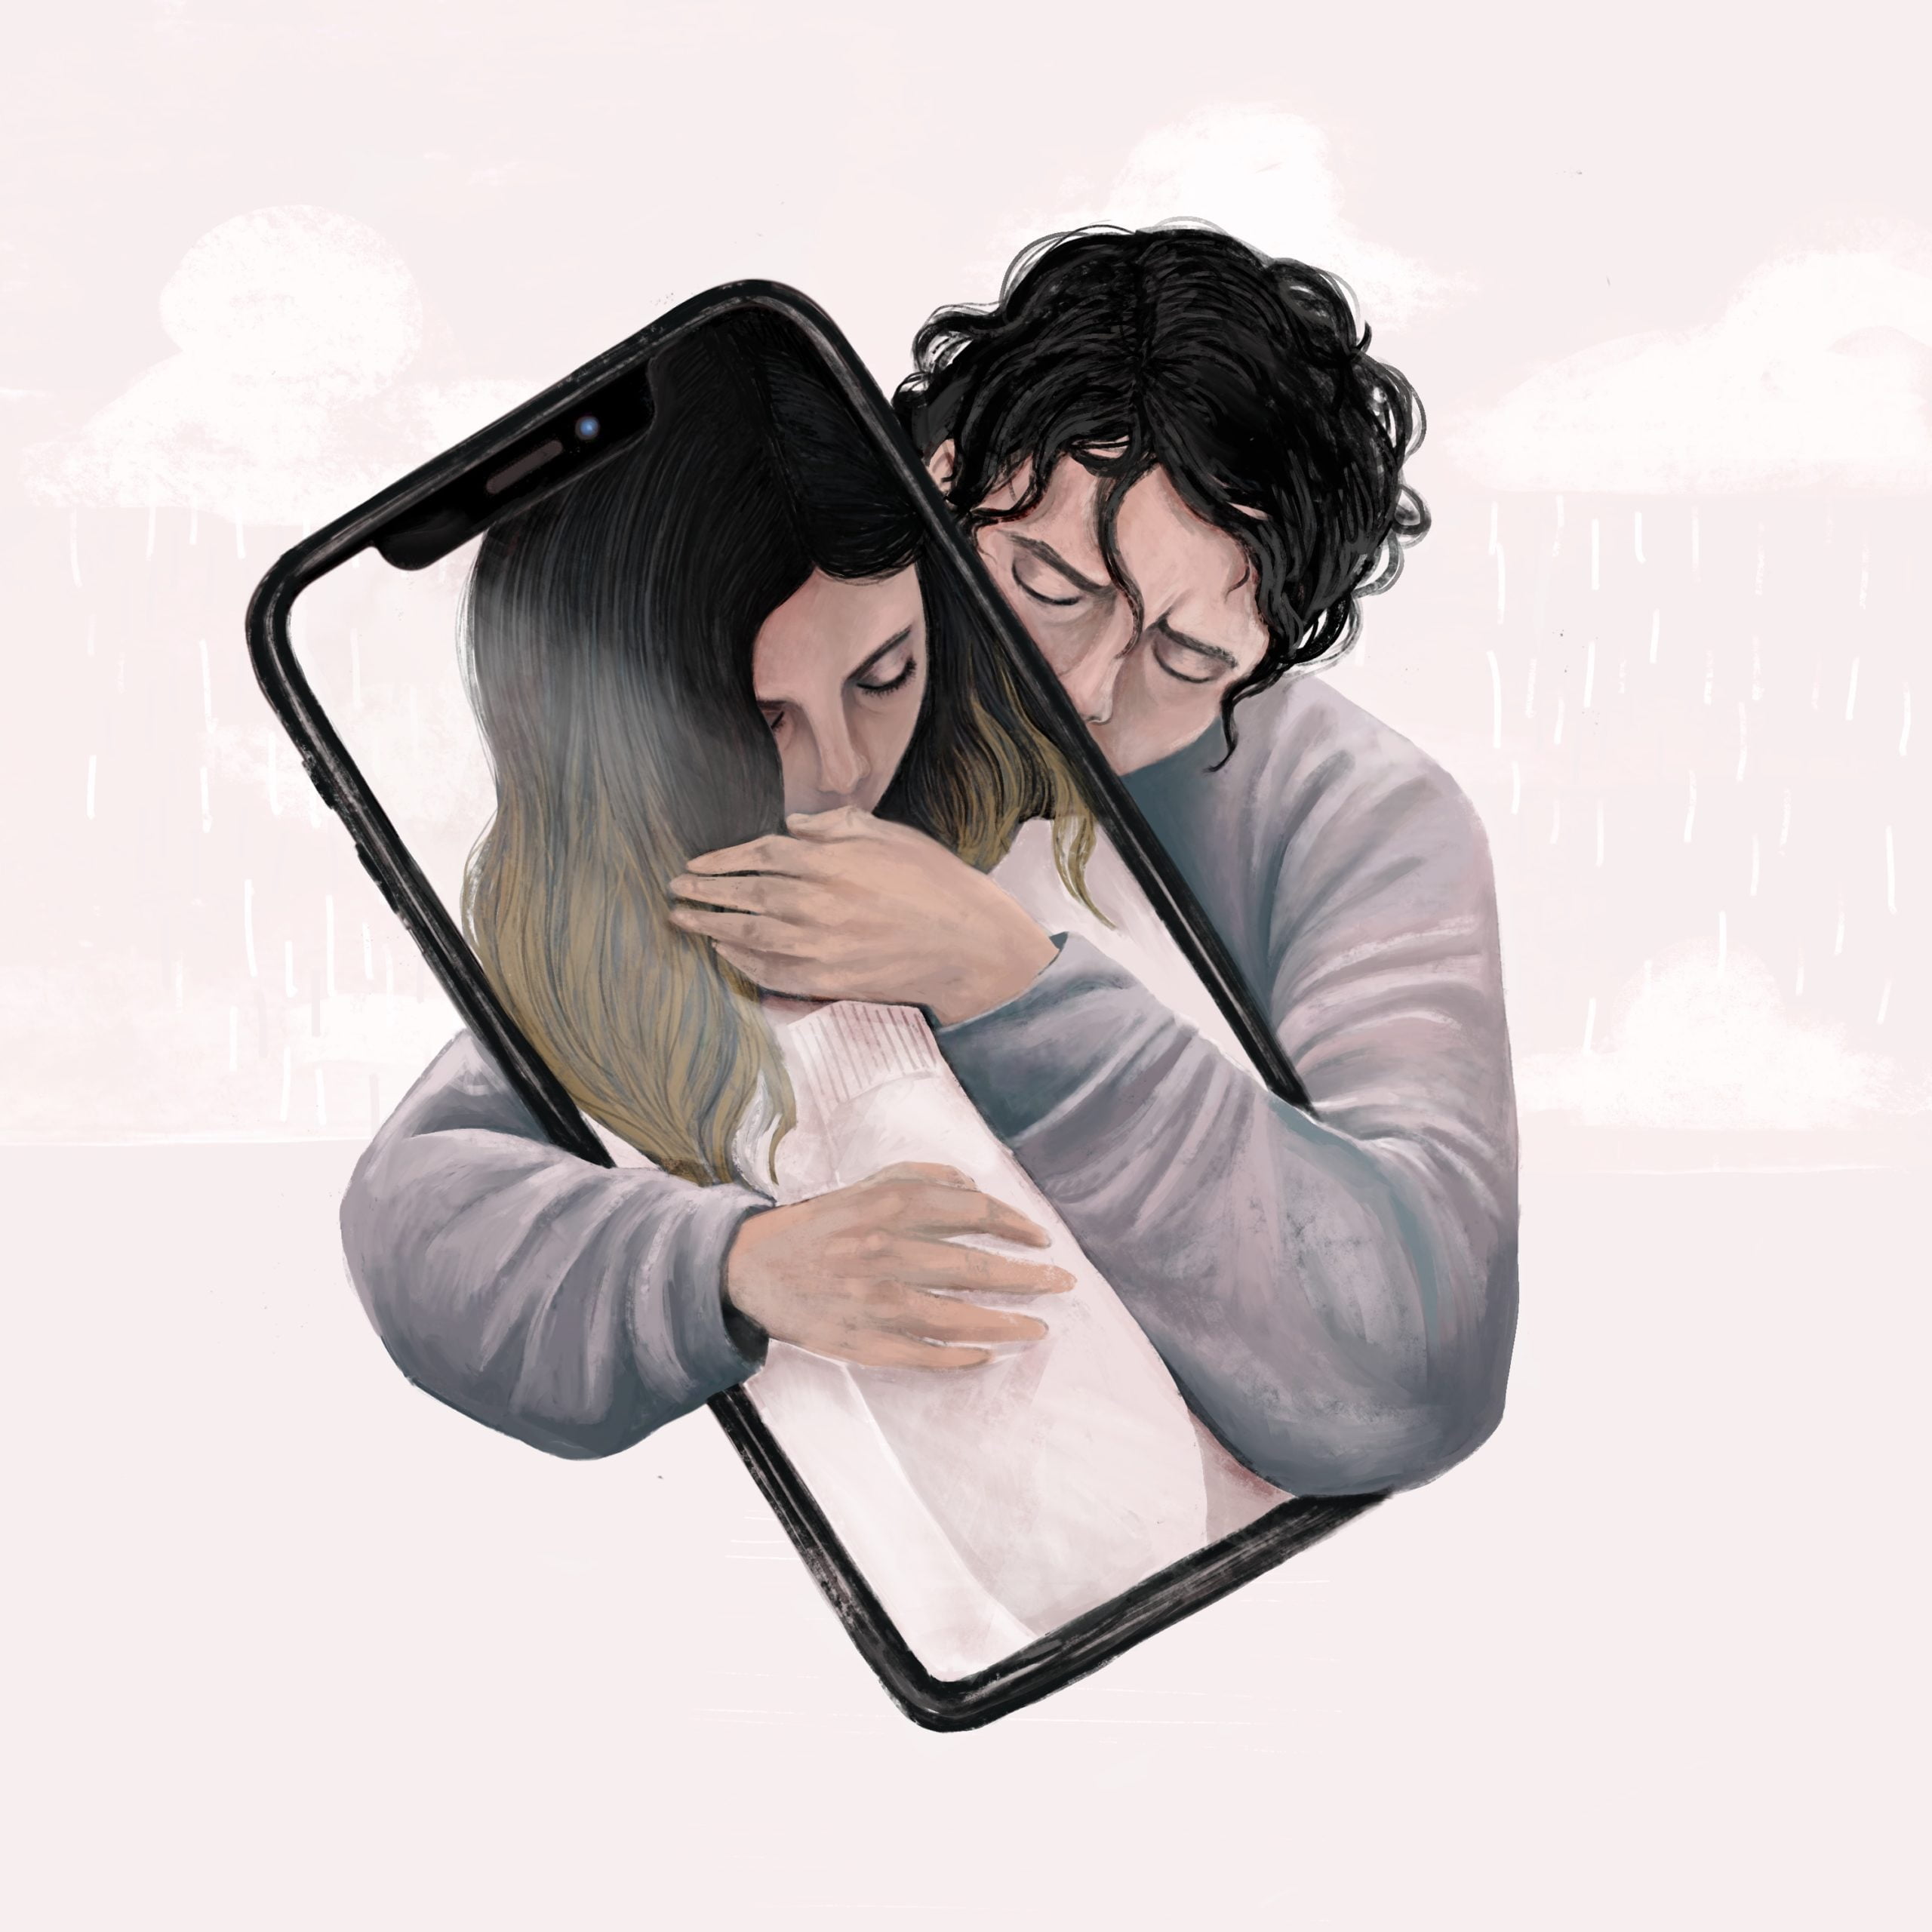 She is contained in the shell of a human sized iPhone. The rain clouded background is washed out, a bright injection of light smoothing the patina of yore. He wraps his arms around the iPhone from behind, as she serenely leans into his hand which covers her own. His hair is disheveled, his brows furrowed, he is in distress while he holds her in a digital embrace.